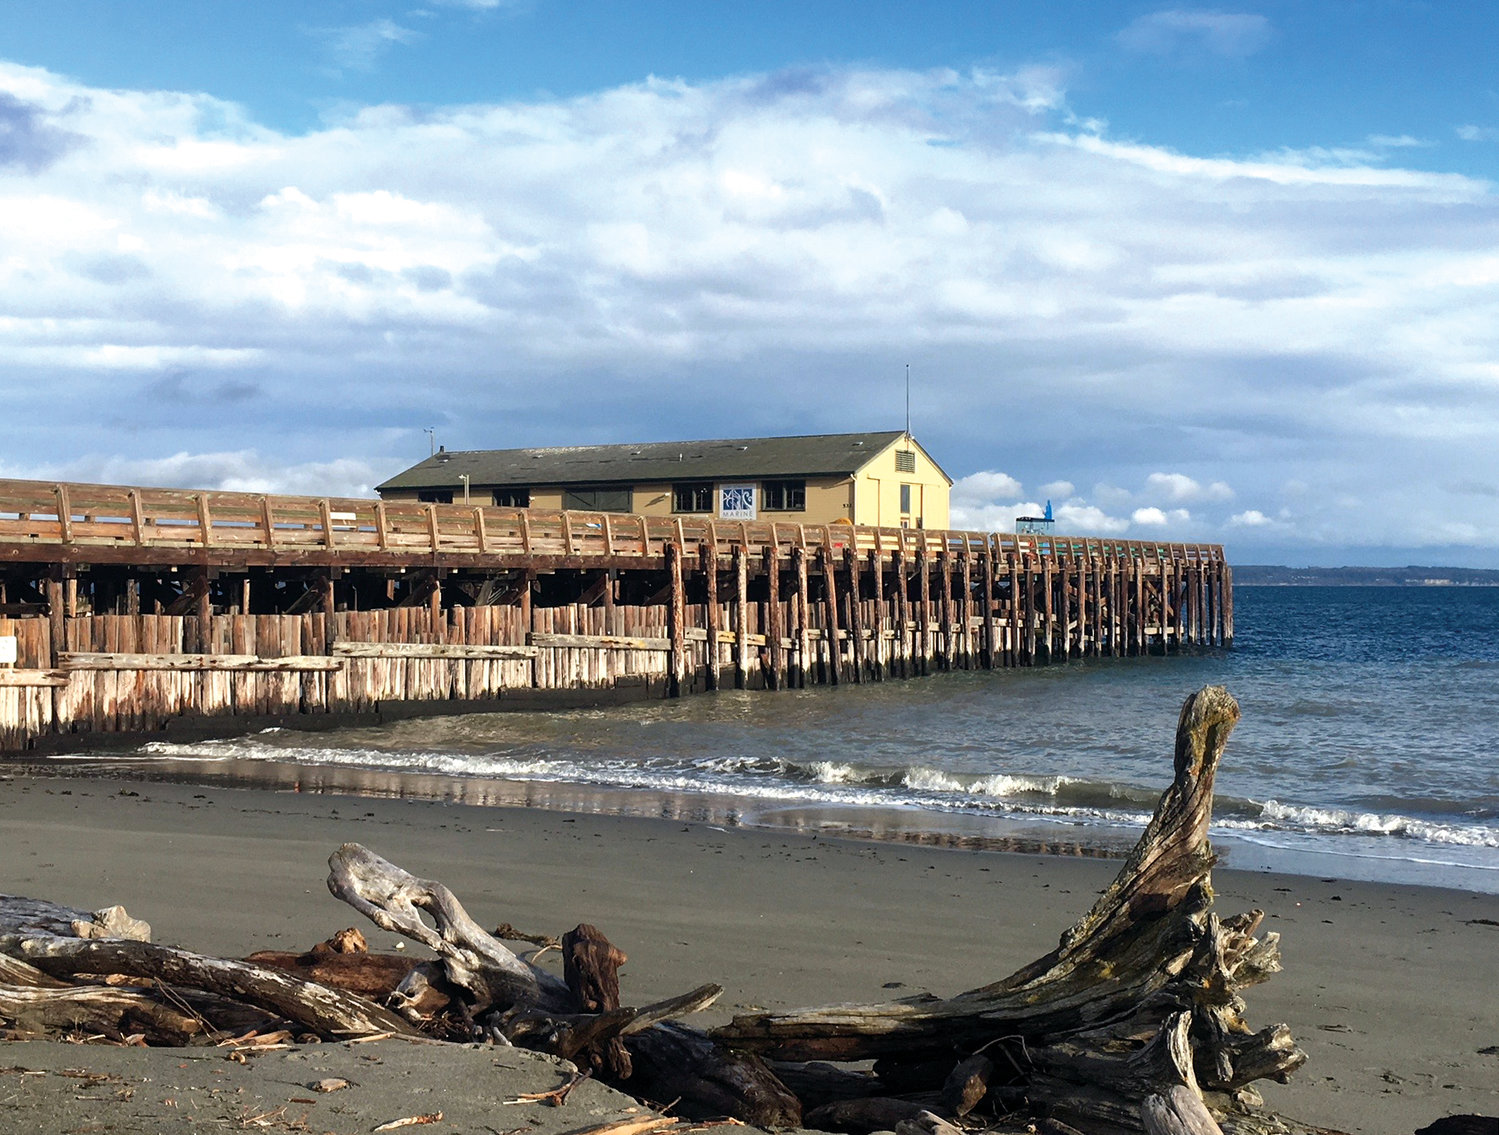 The Port Townsend Marine Science Center aquarium stands at the end of the pier at the beach at Fort Worden. This pier is secure, but needs to be repaired or replaced in the coming years, said Janine Boire, executive director of the science center.